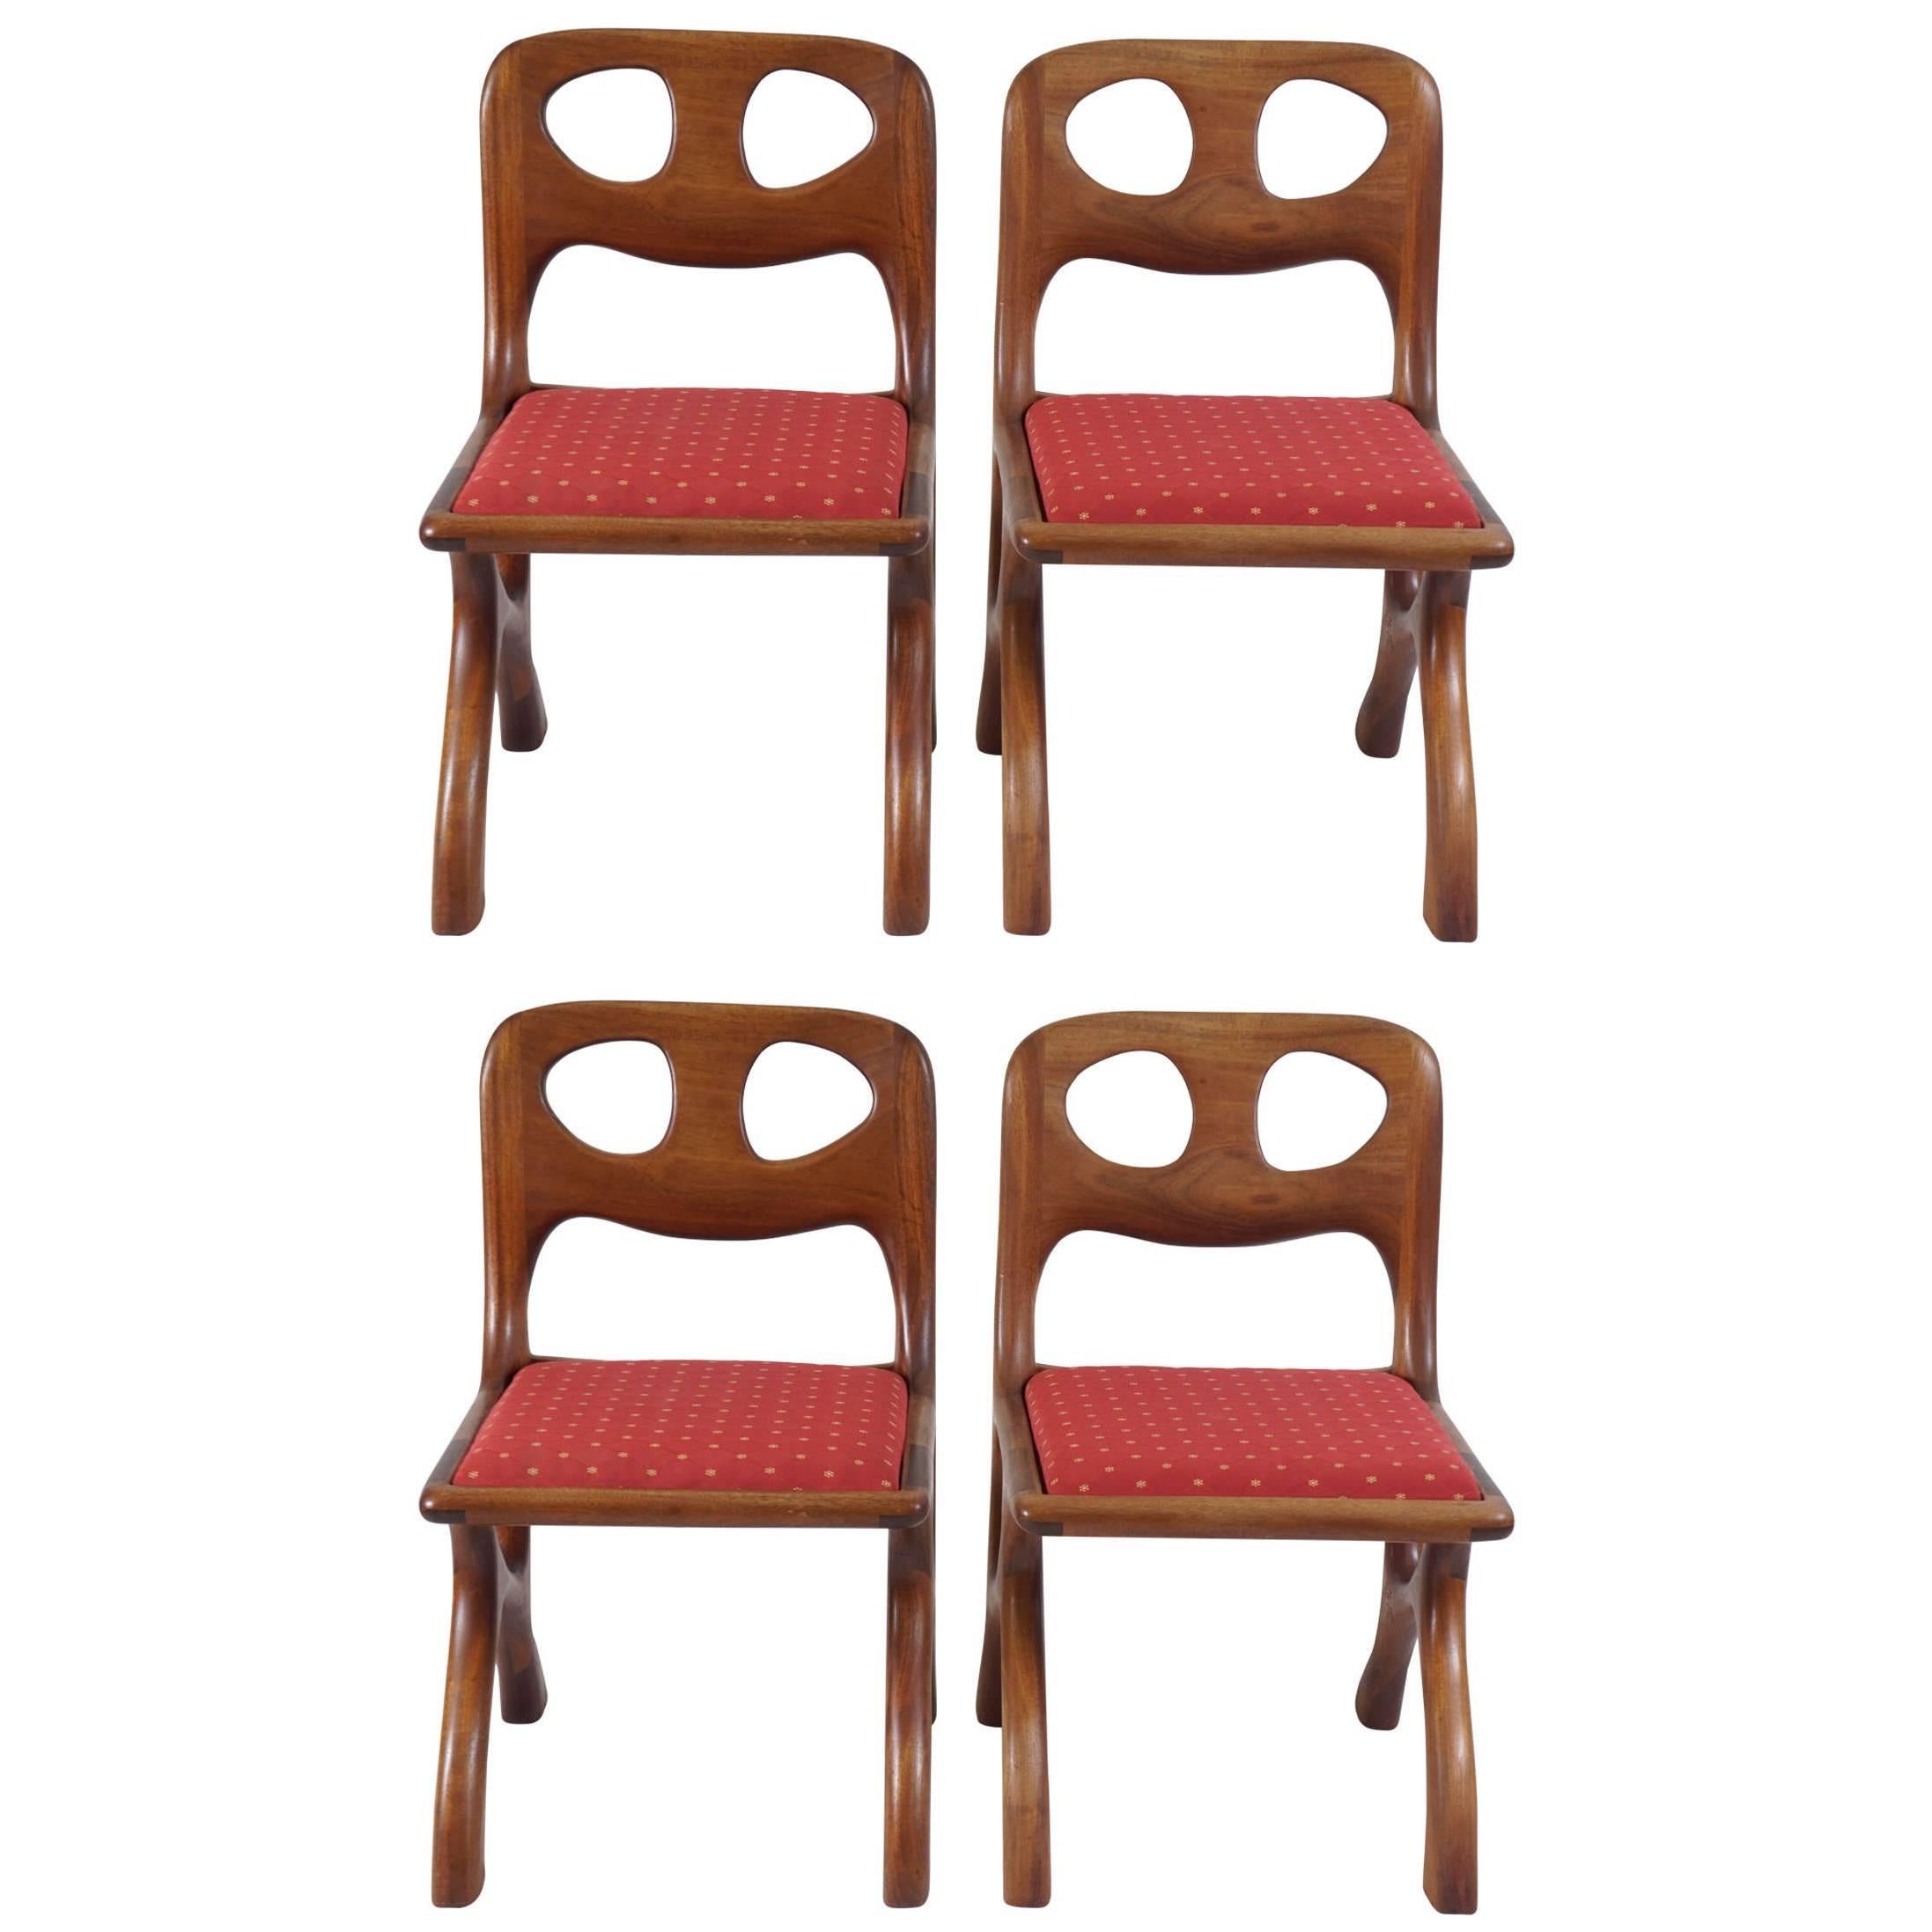 70's American craftsman walnut chairs only For Sale